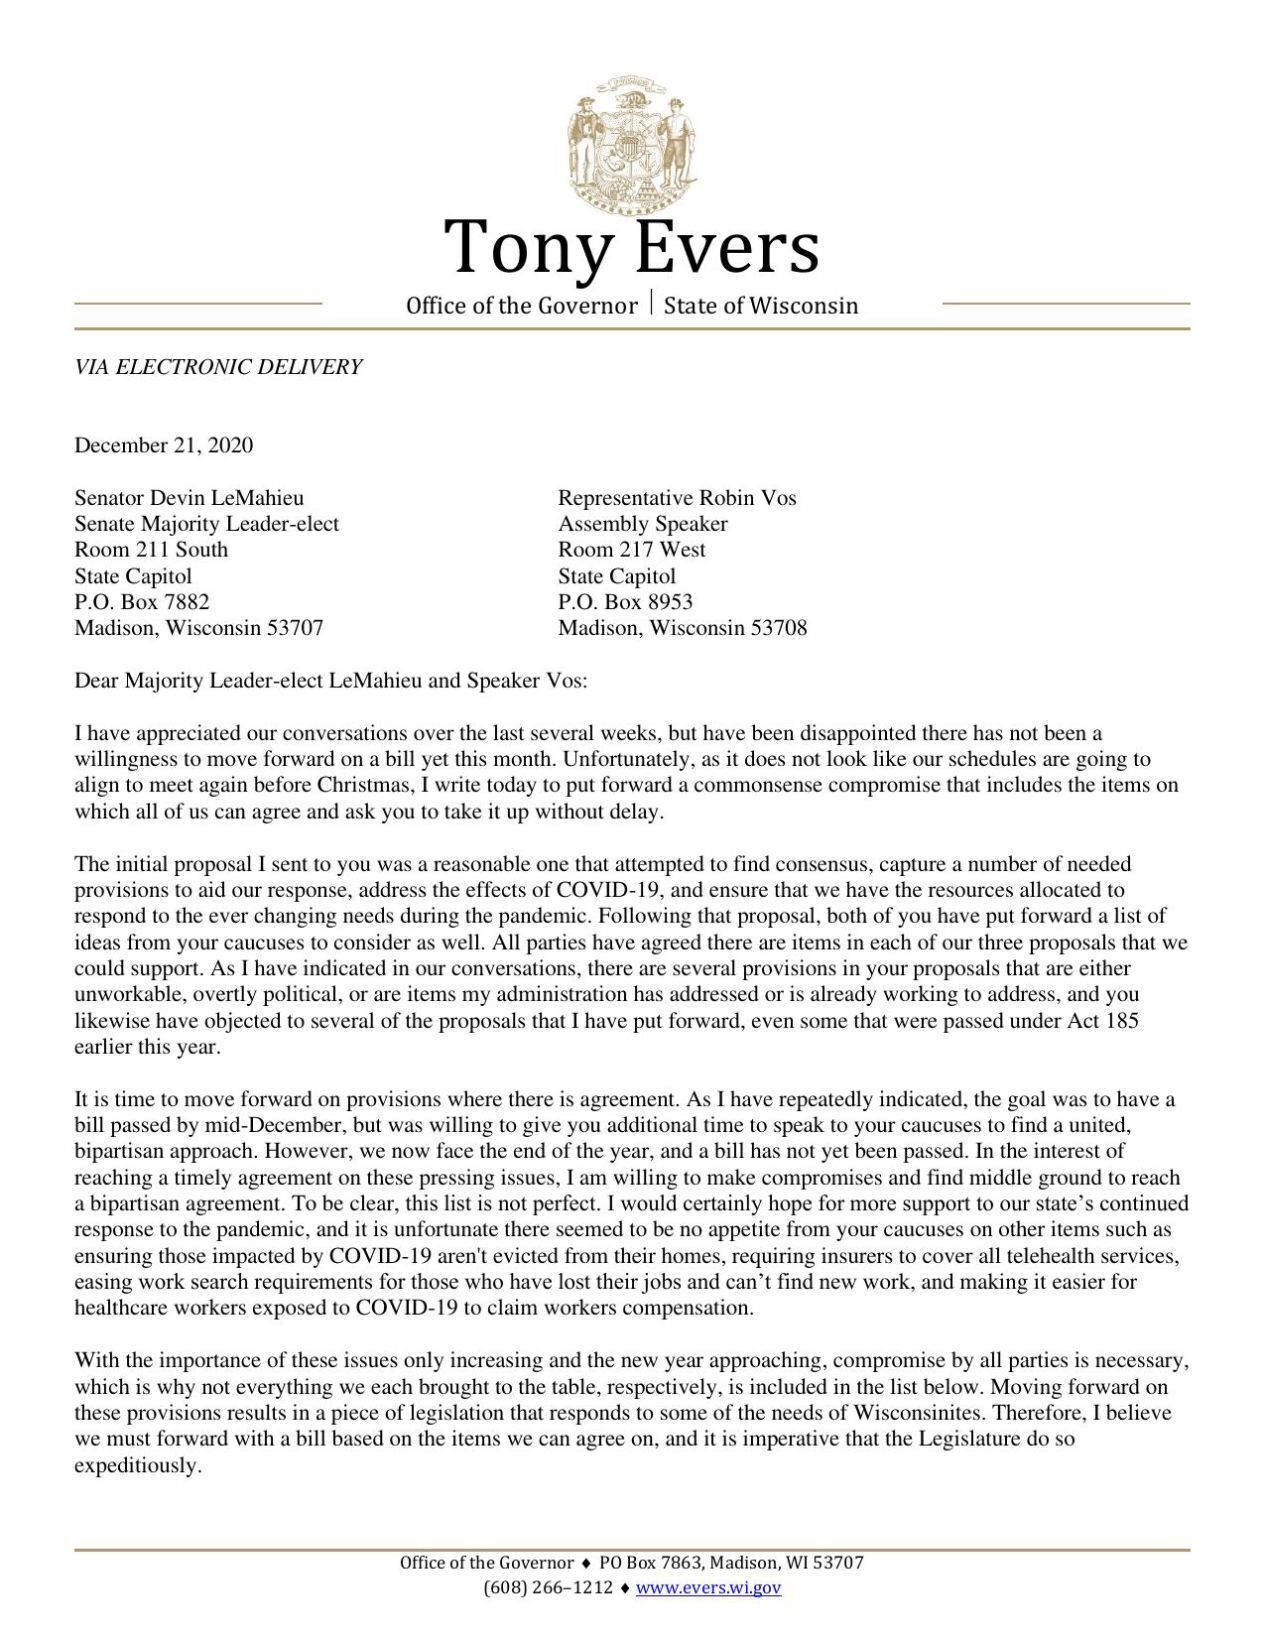 Evers GOP letter